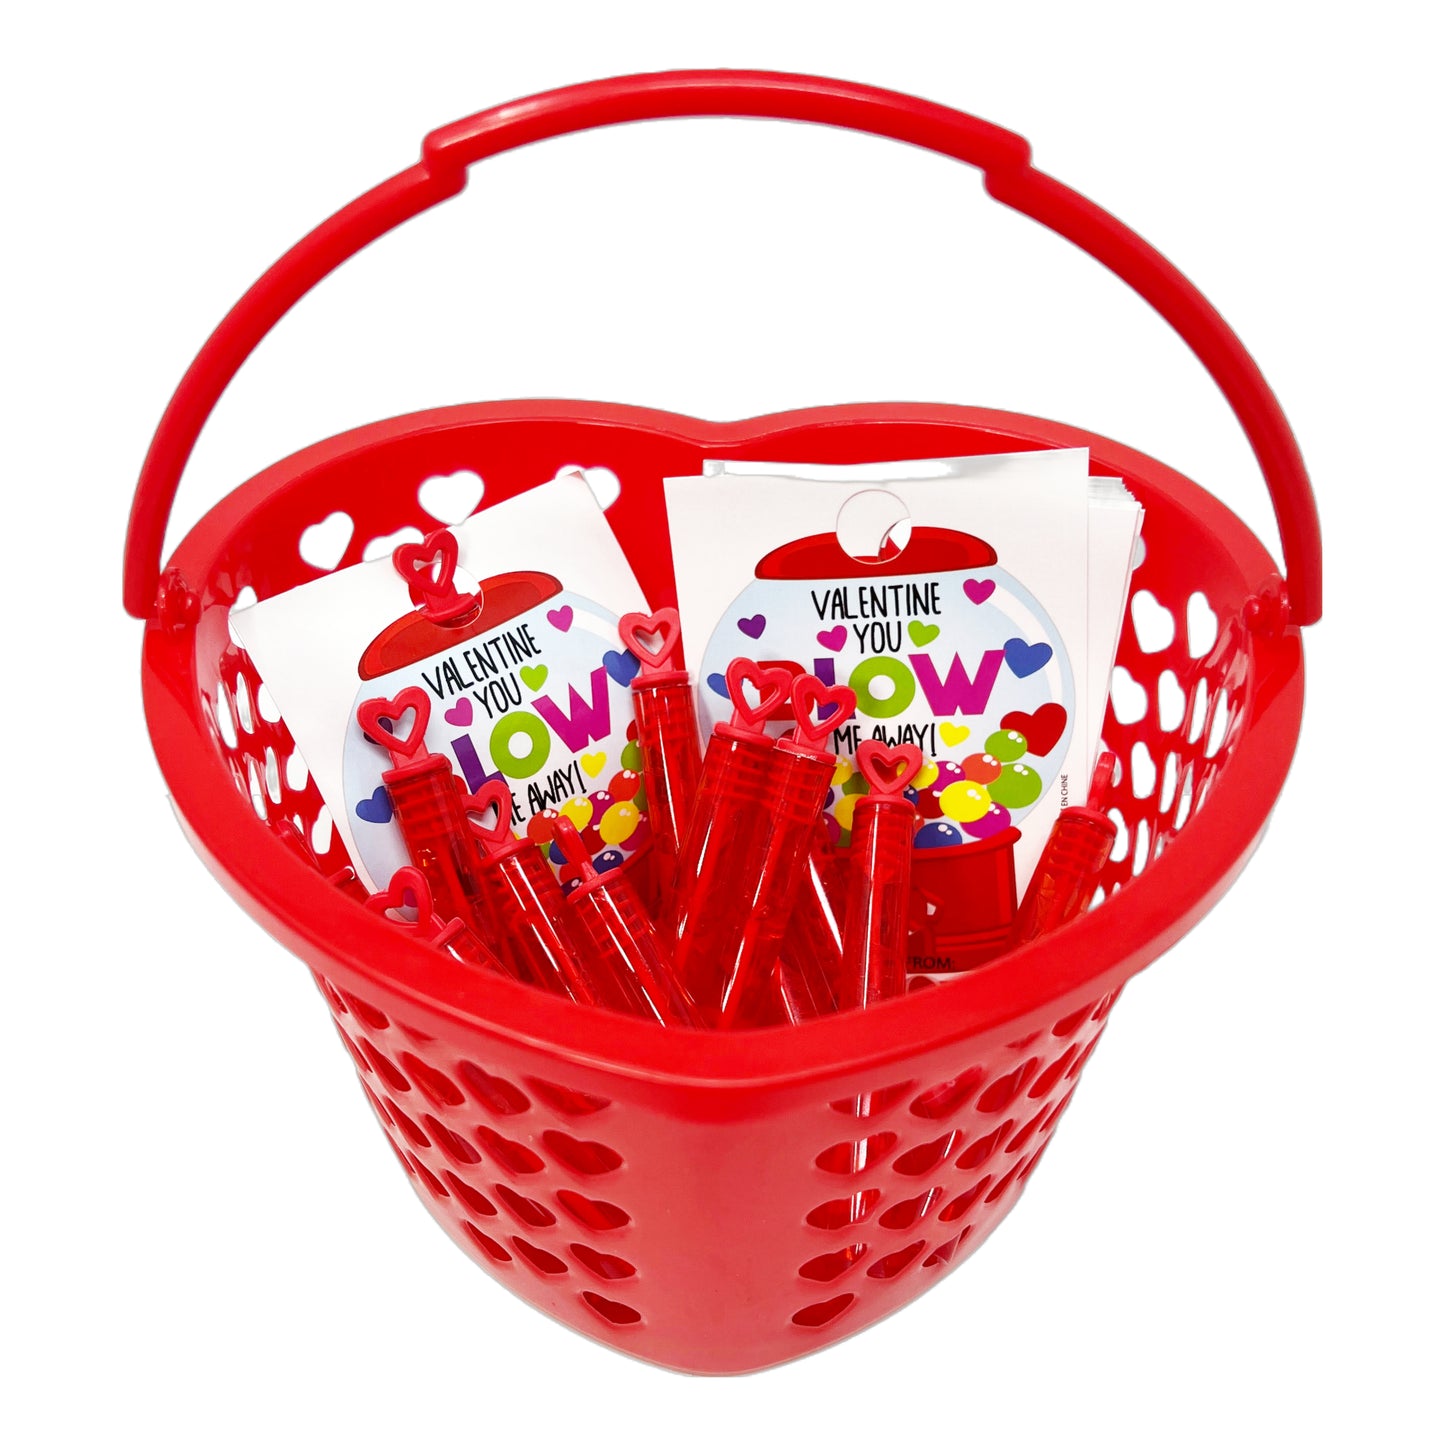 Cheep N Cheerful Valentine Kiddie Card Heart Basket with 16ct Bubble Wands and Cards, Valentine Party Favors, Kids Valentine